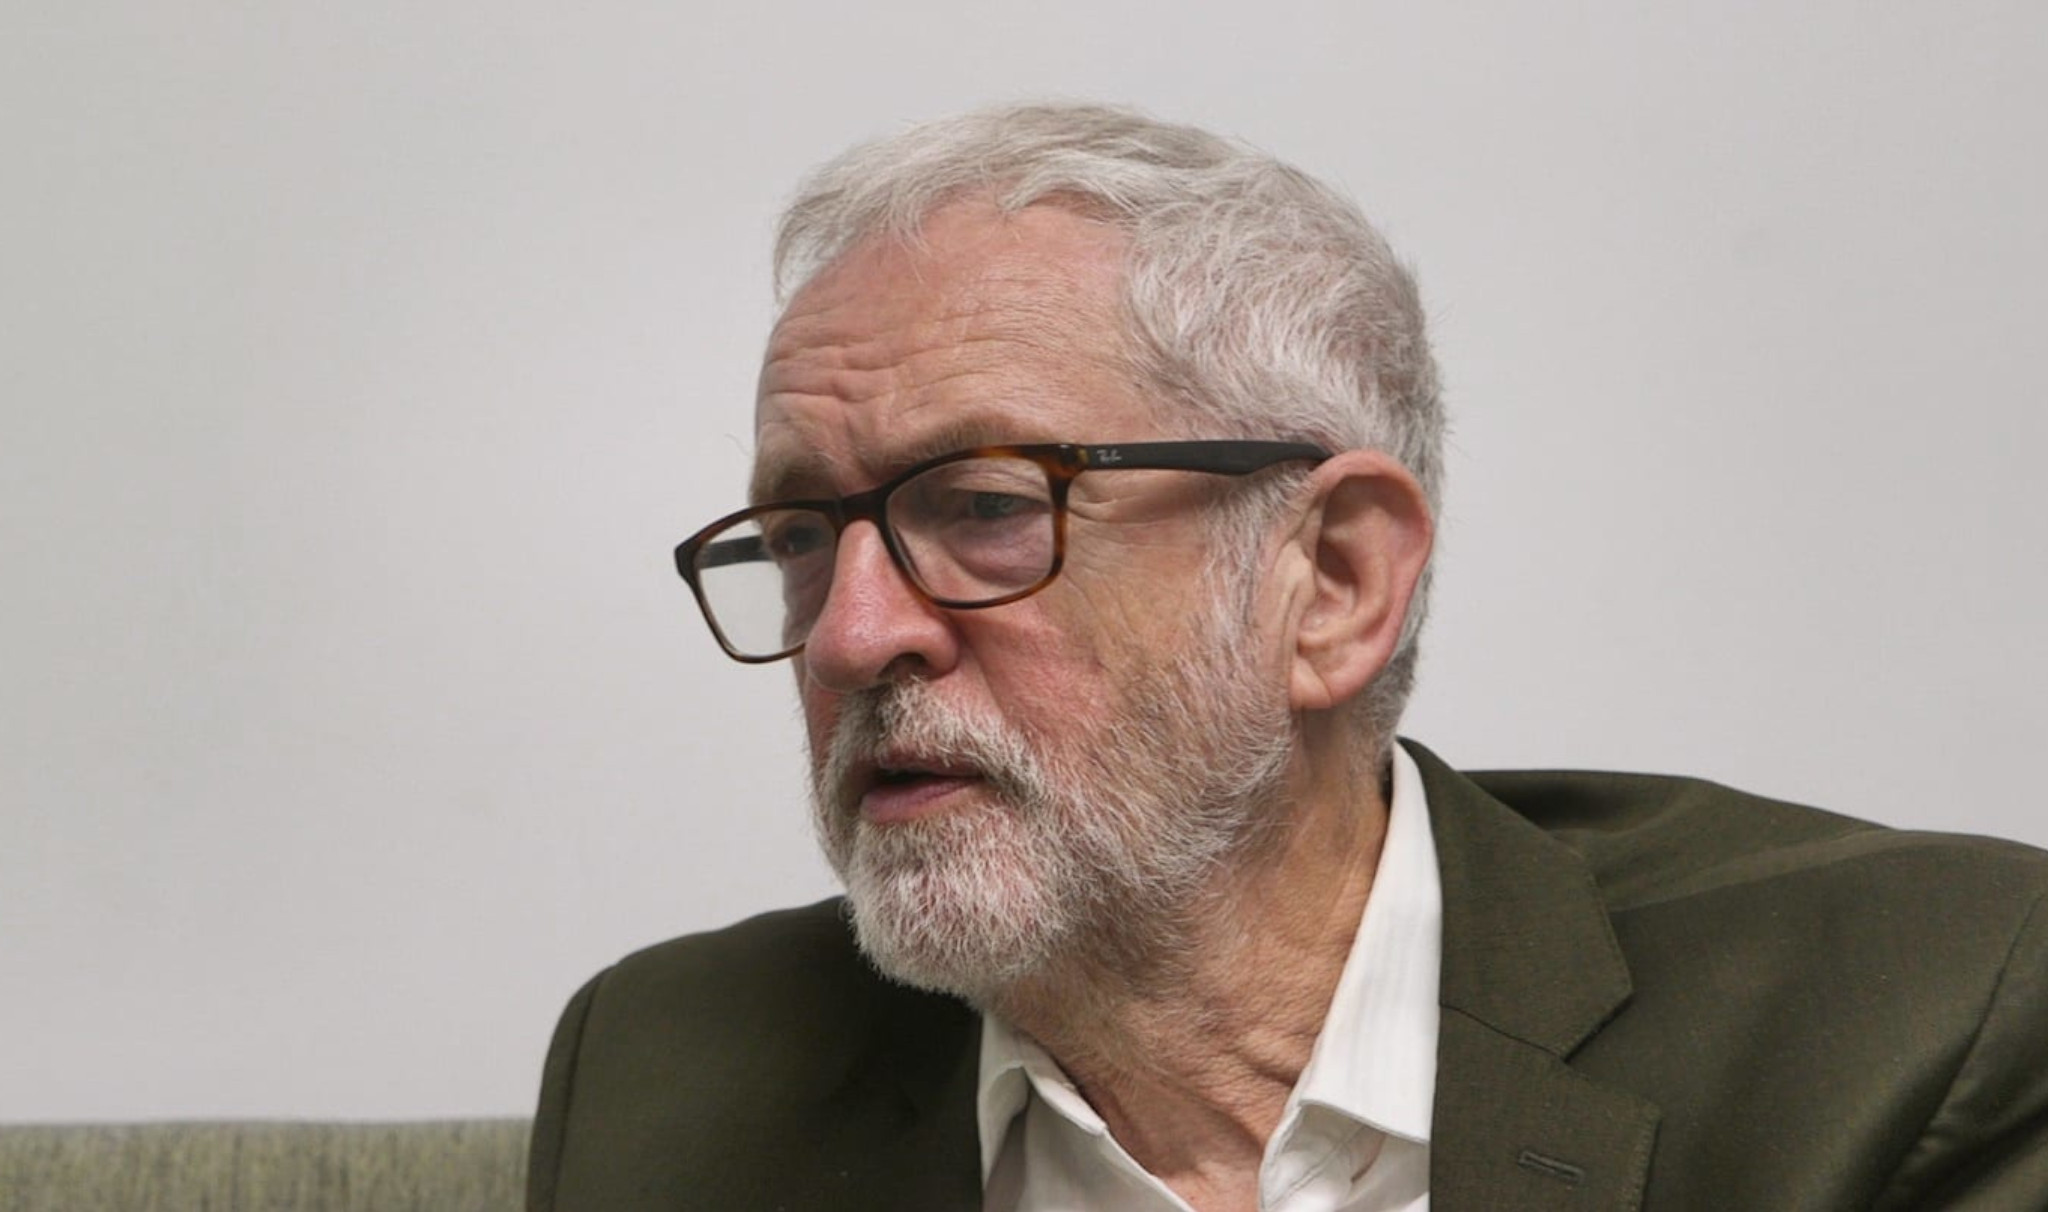 Exclusive: Jeremy Corbyn on the establishment campaign to stop him becoming PM